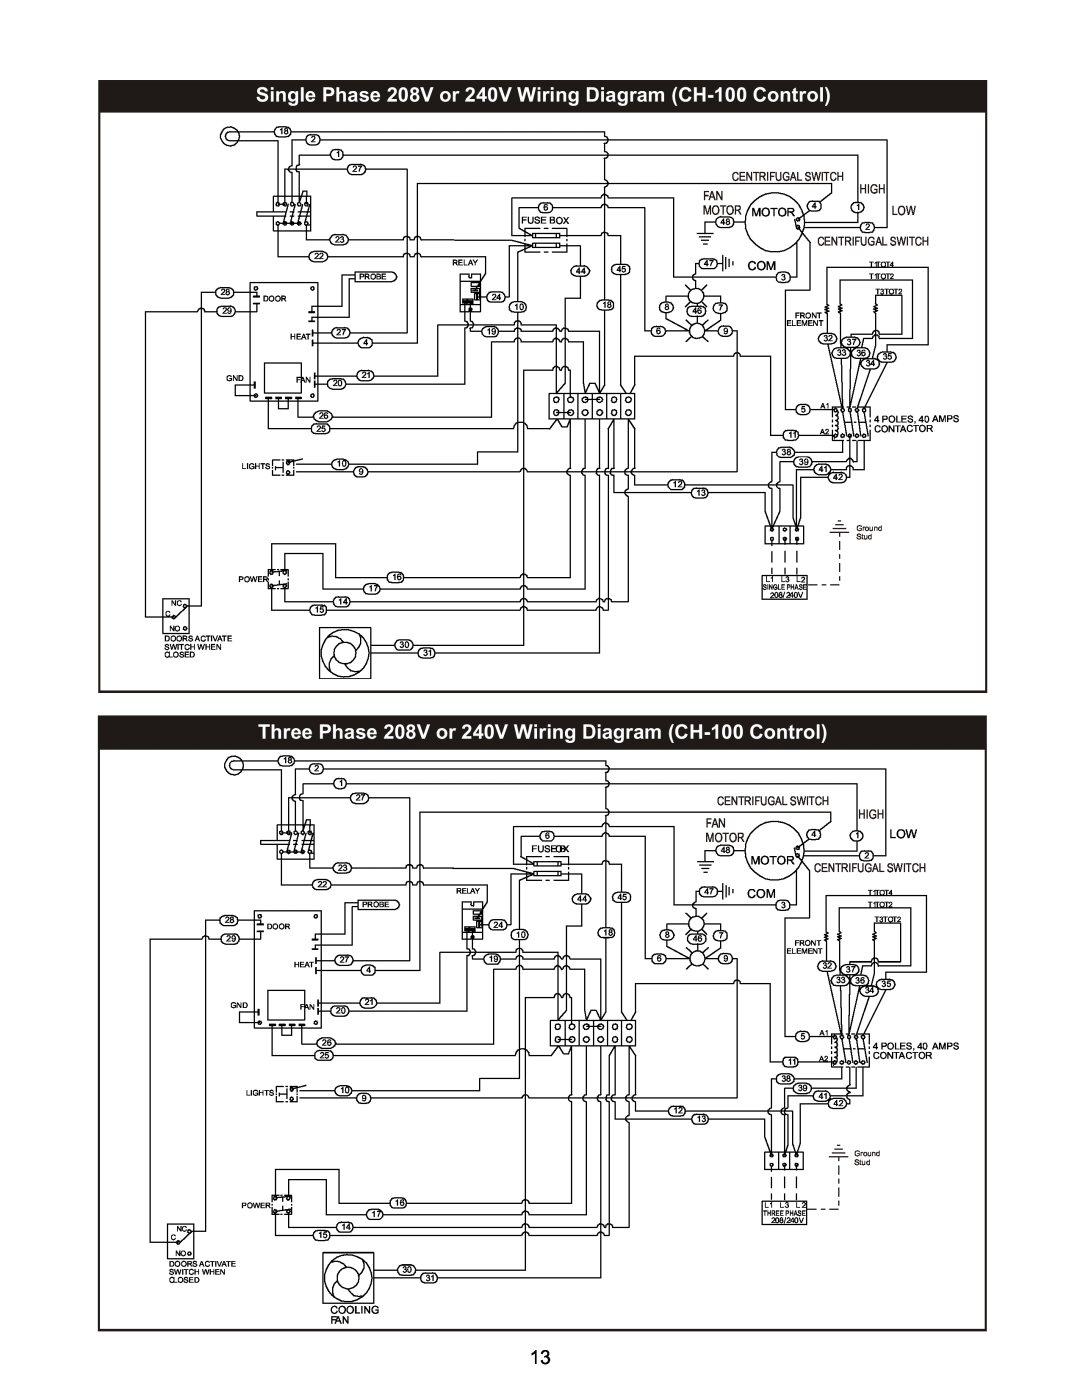 Bakers Pride Oven CB-MVPWDS Single Phase 208V or 240V Wiring Diagram CH-100 Control, High, Motor Motor, Centrifugal Switch 